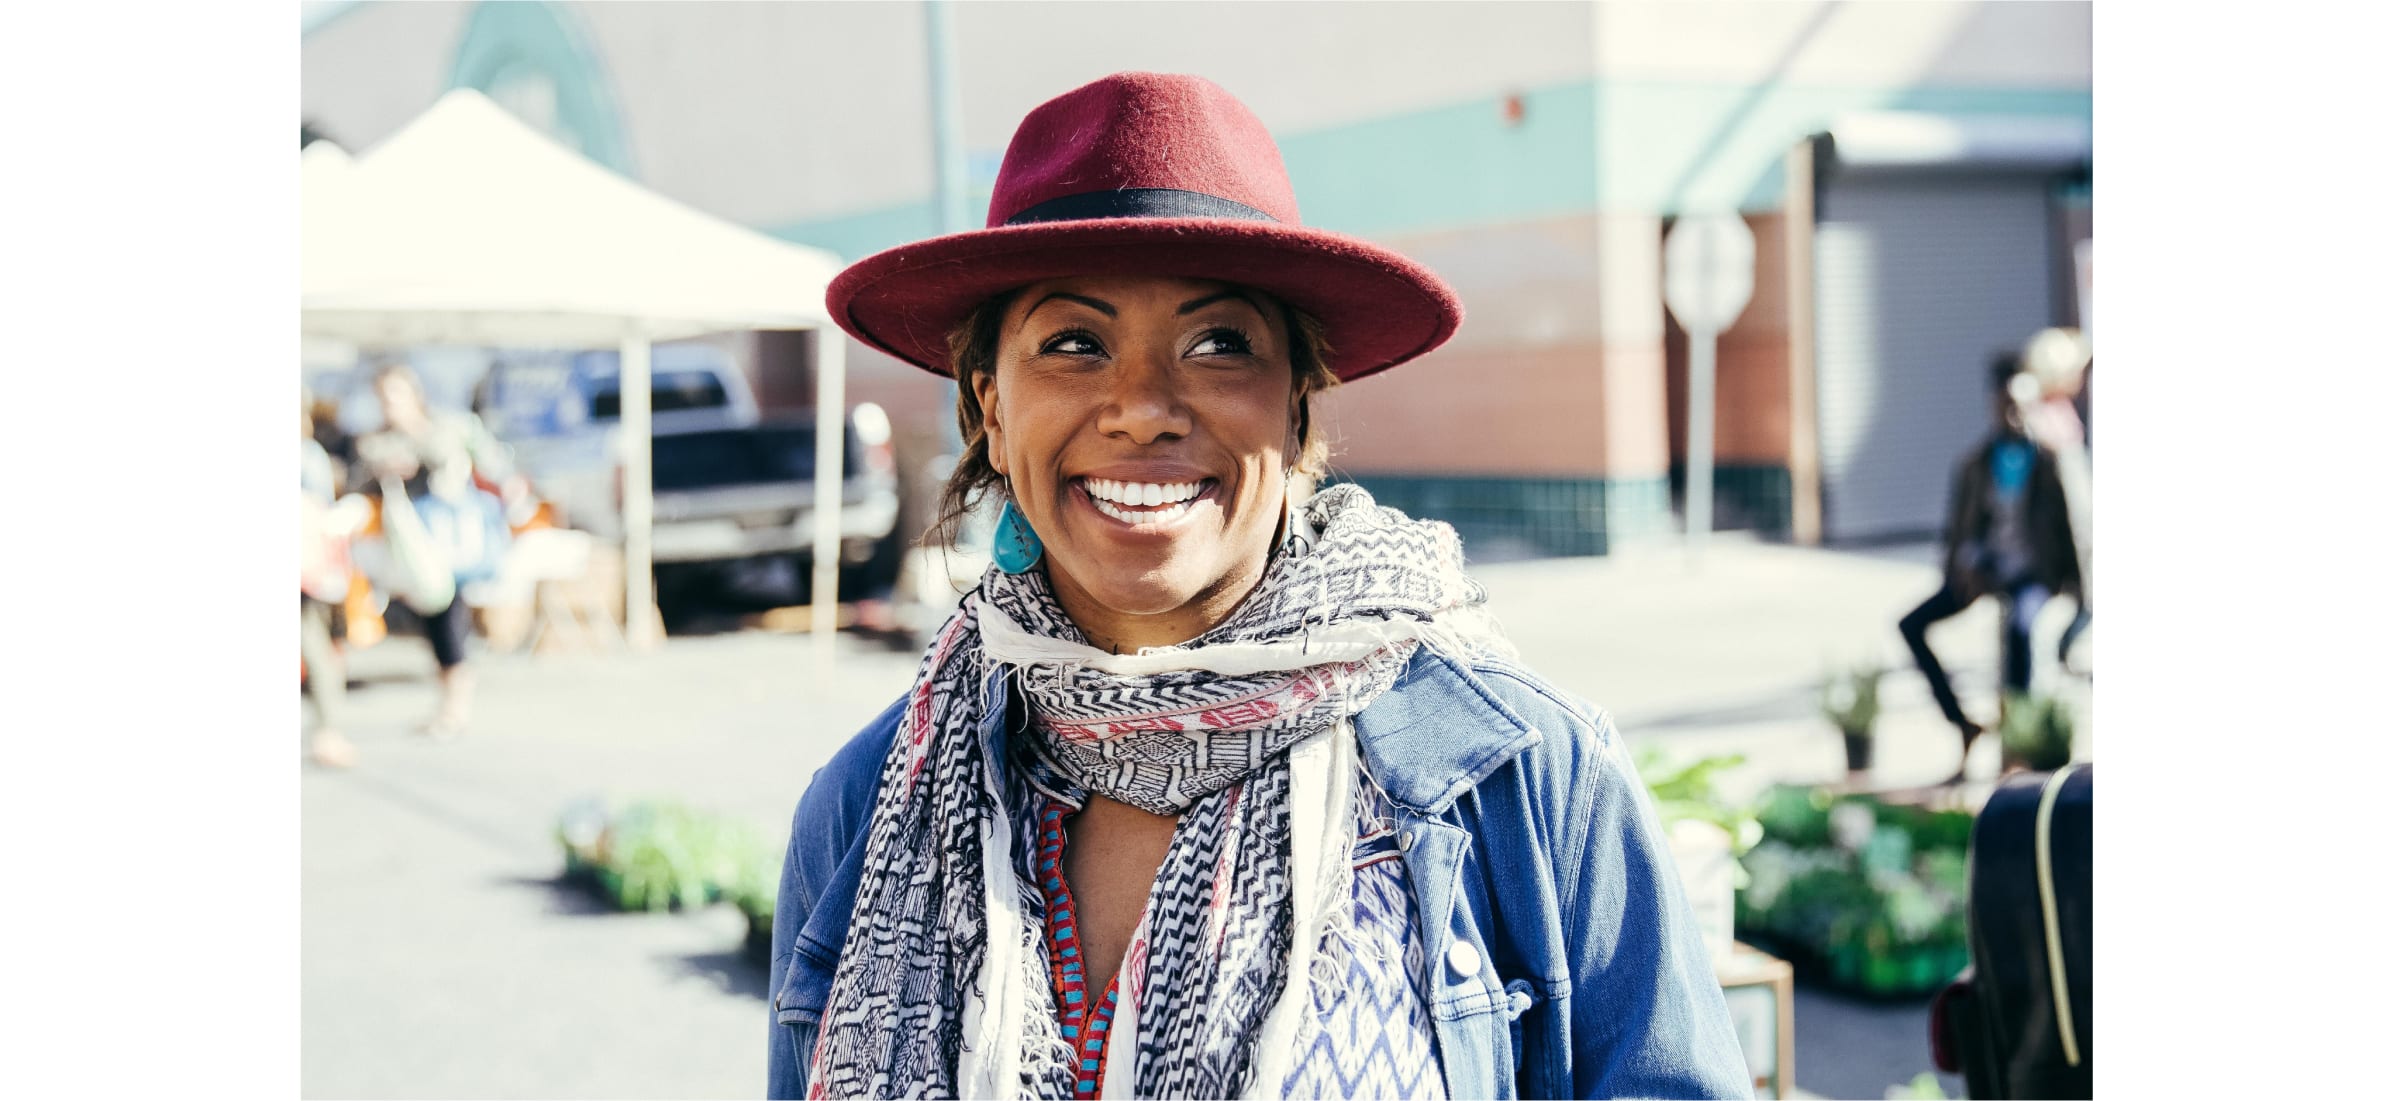 A smiling person wearing a fedora hat and colourful scarf.